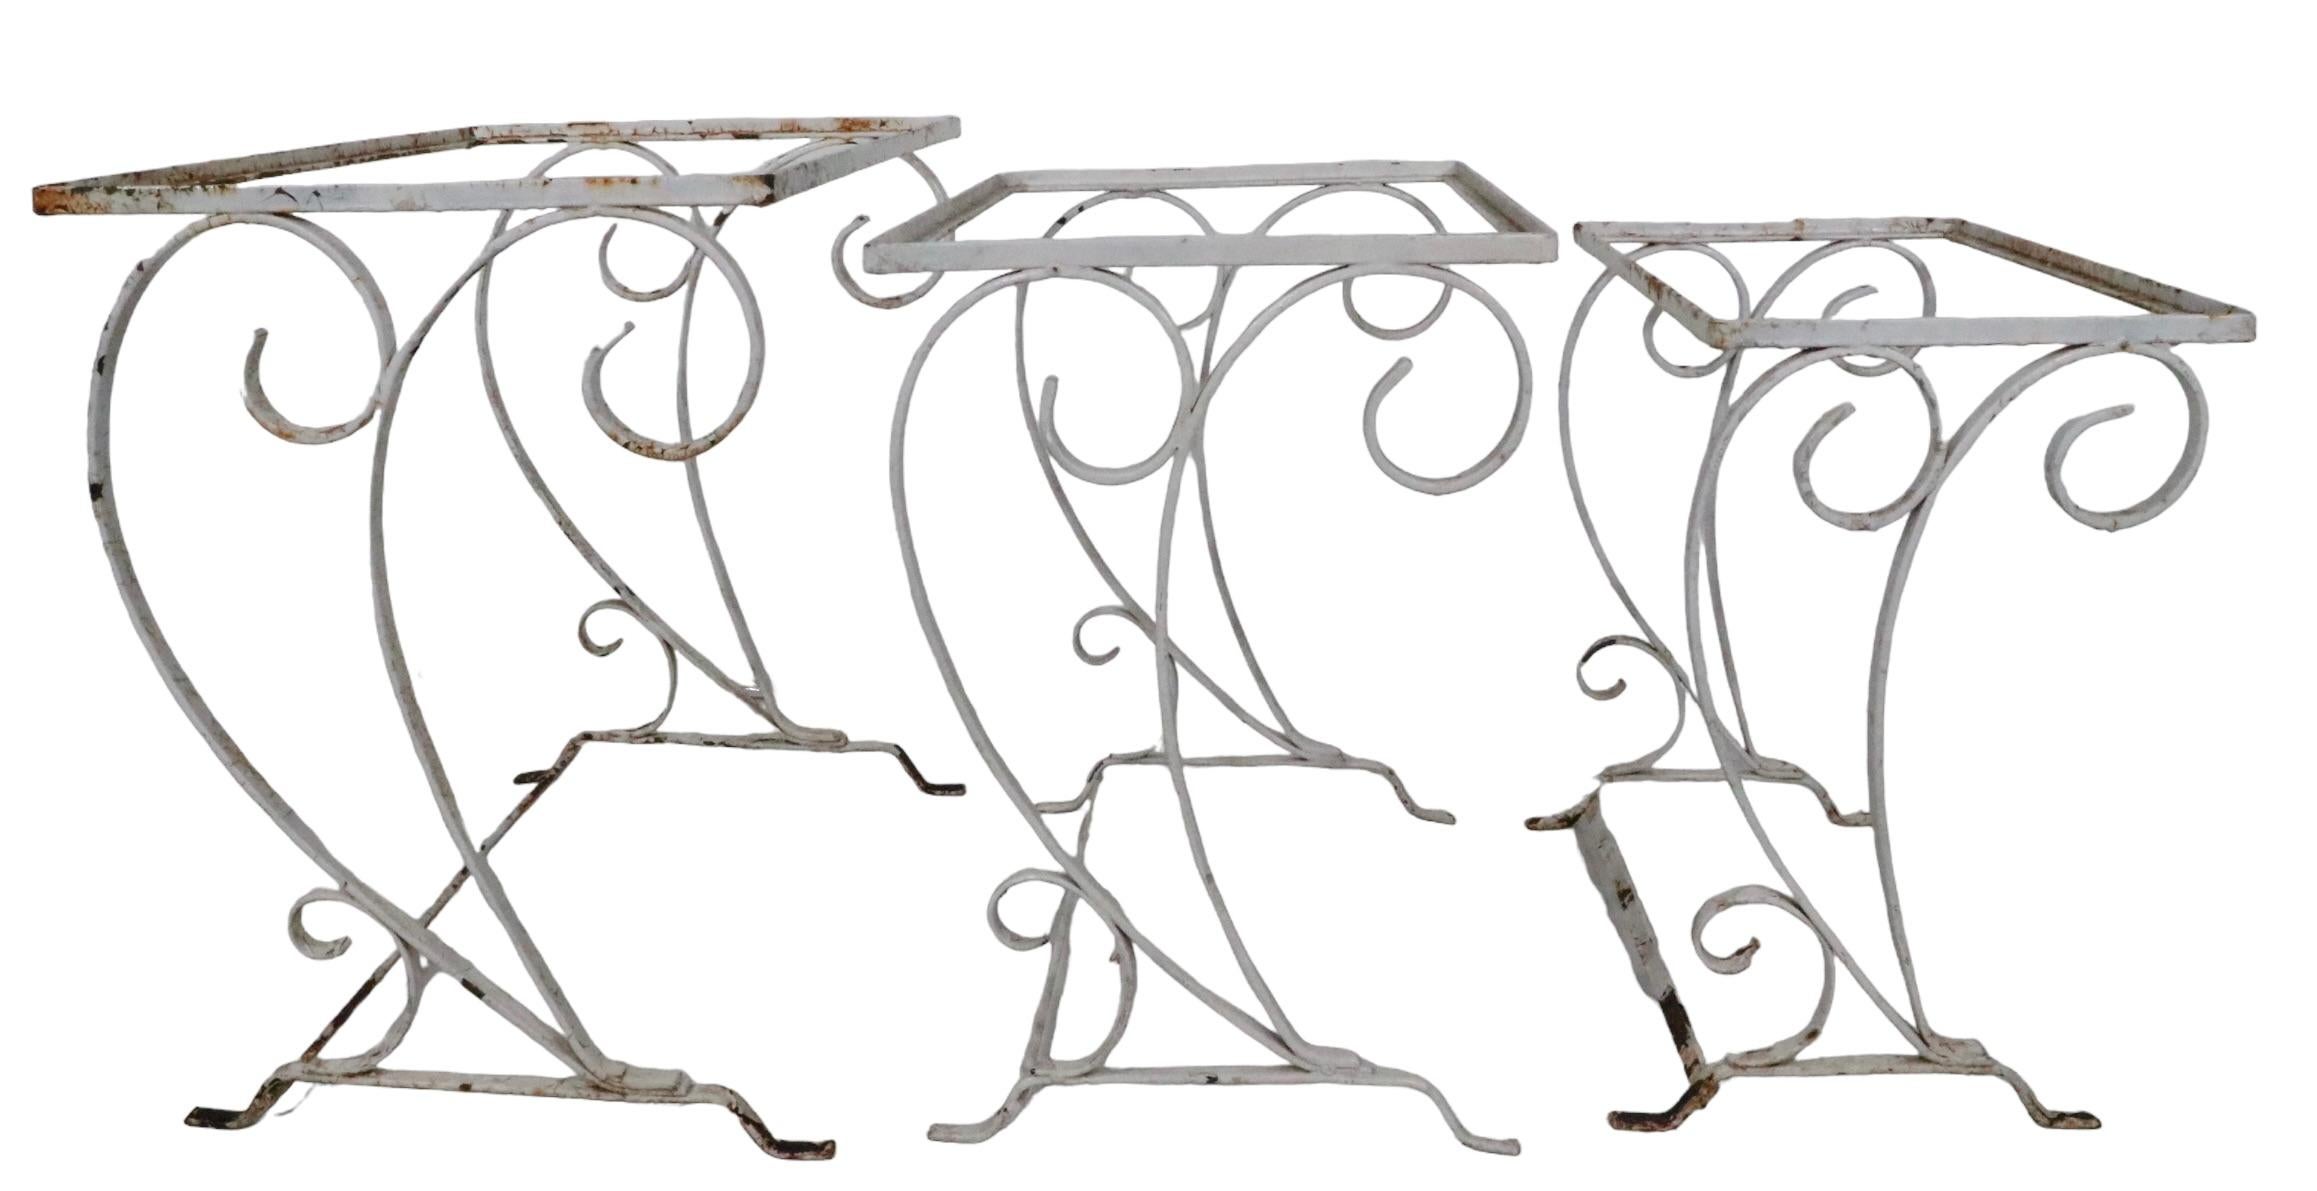 Nest of 3 Art Deco Mid Century Wrought Iron Patio Garden Tables by Salterini For Sale 1